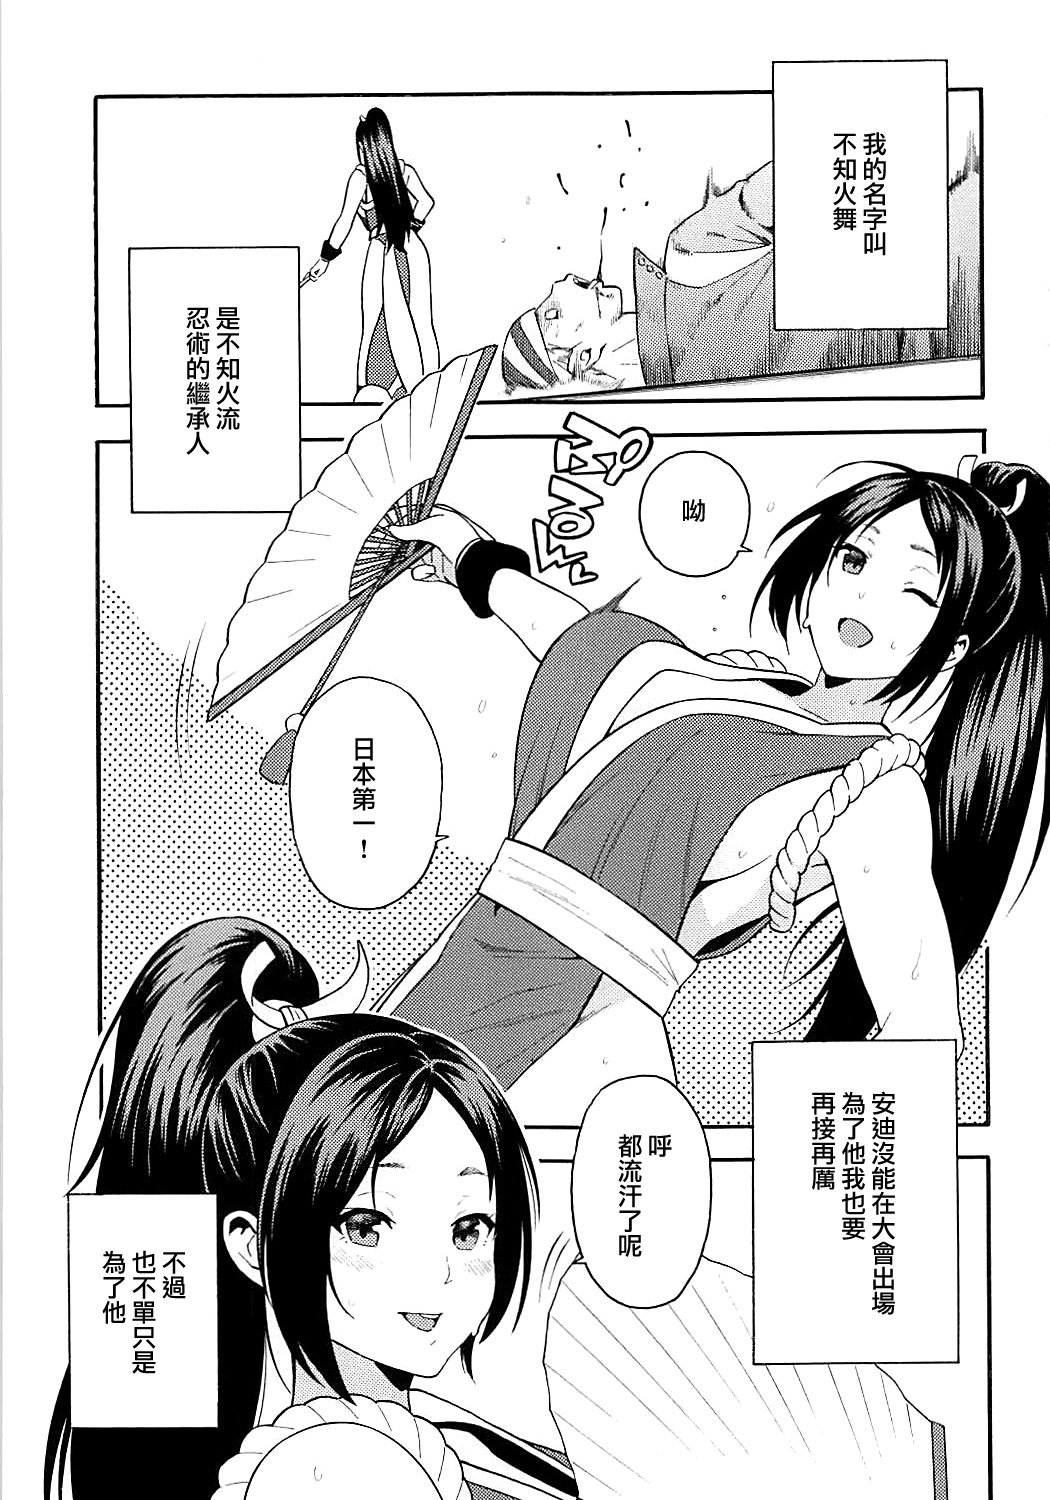 (COMIC1☆13) [SOLID AIR (Zonda)] Inmairan (King of Fighters) [Chinese] [无毒汉化组] page 3 full